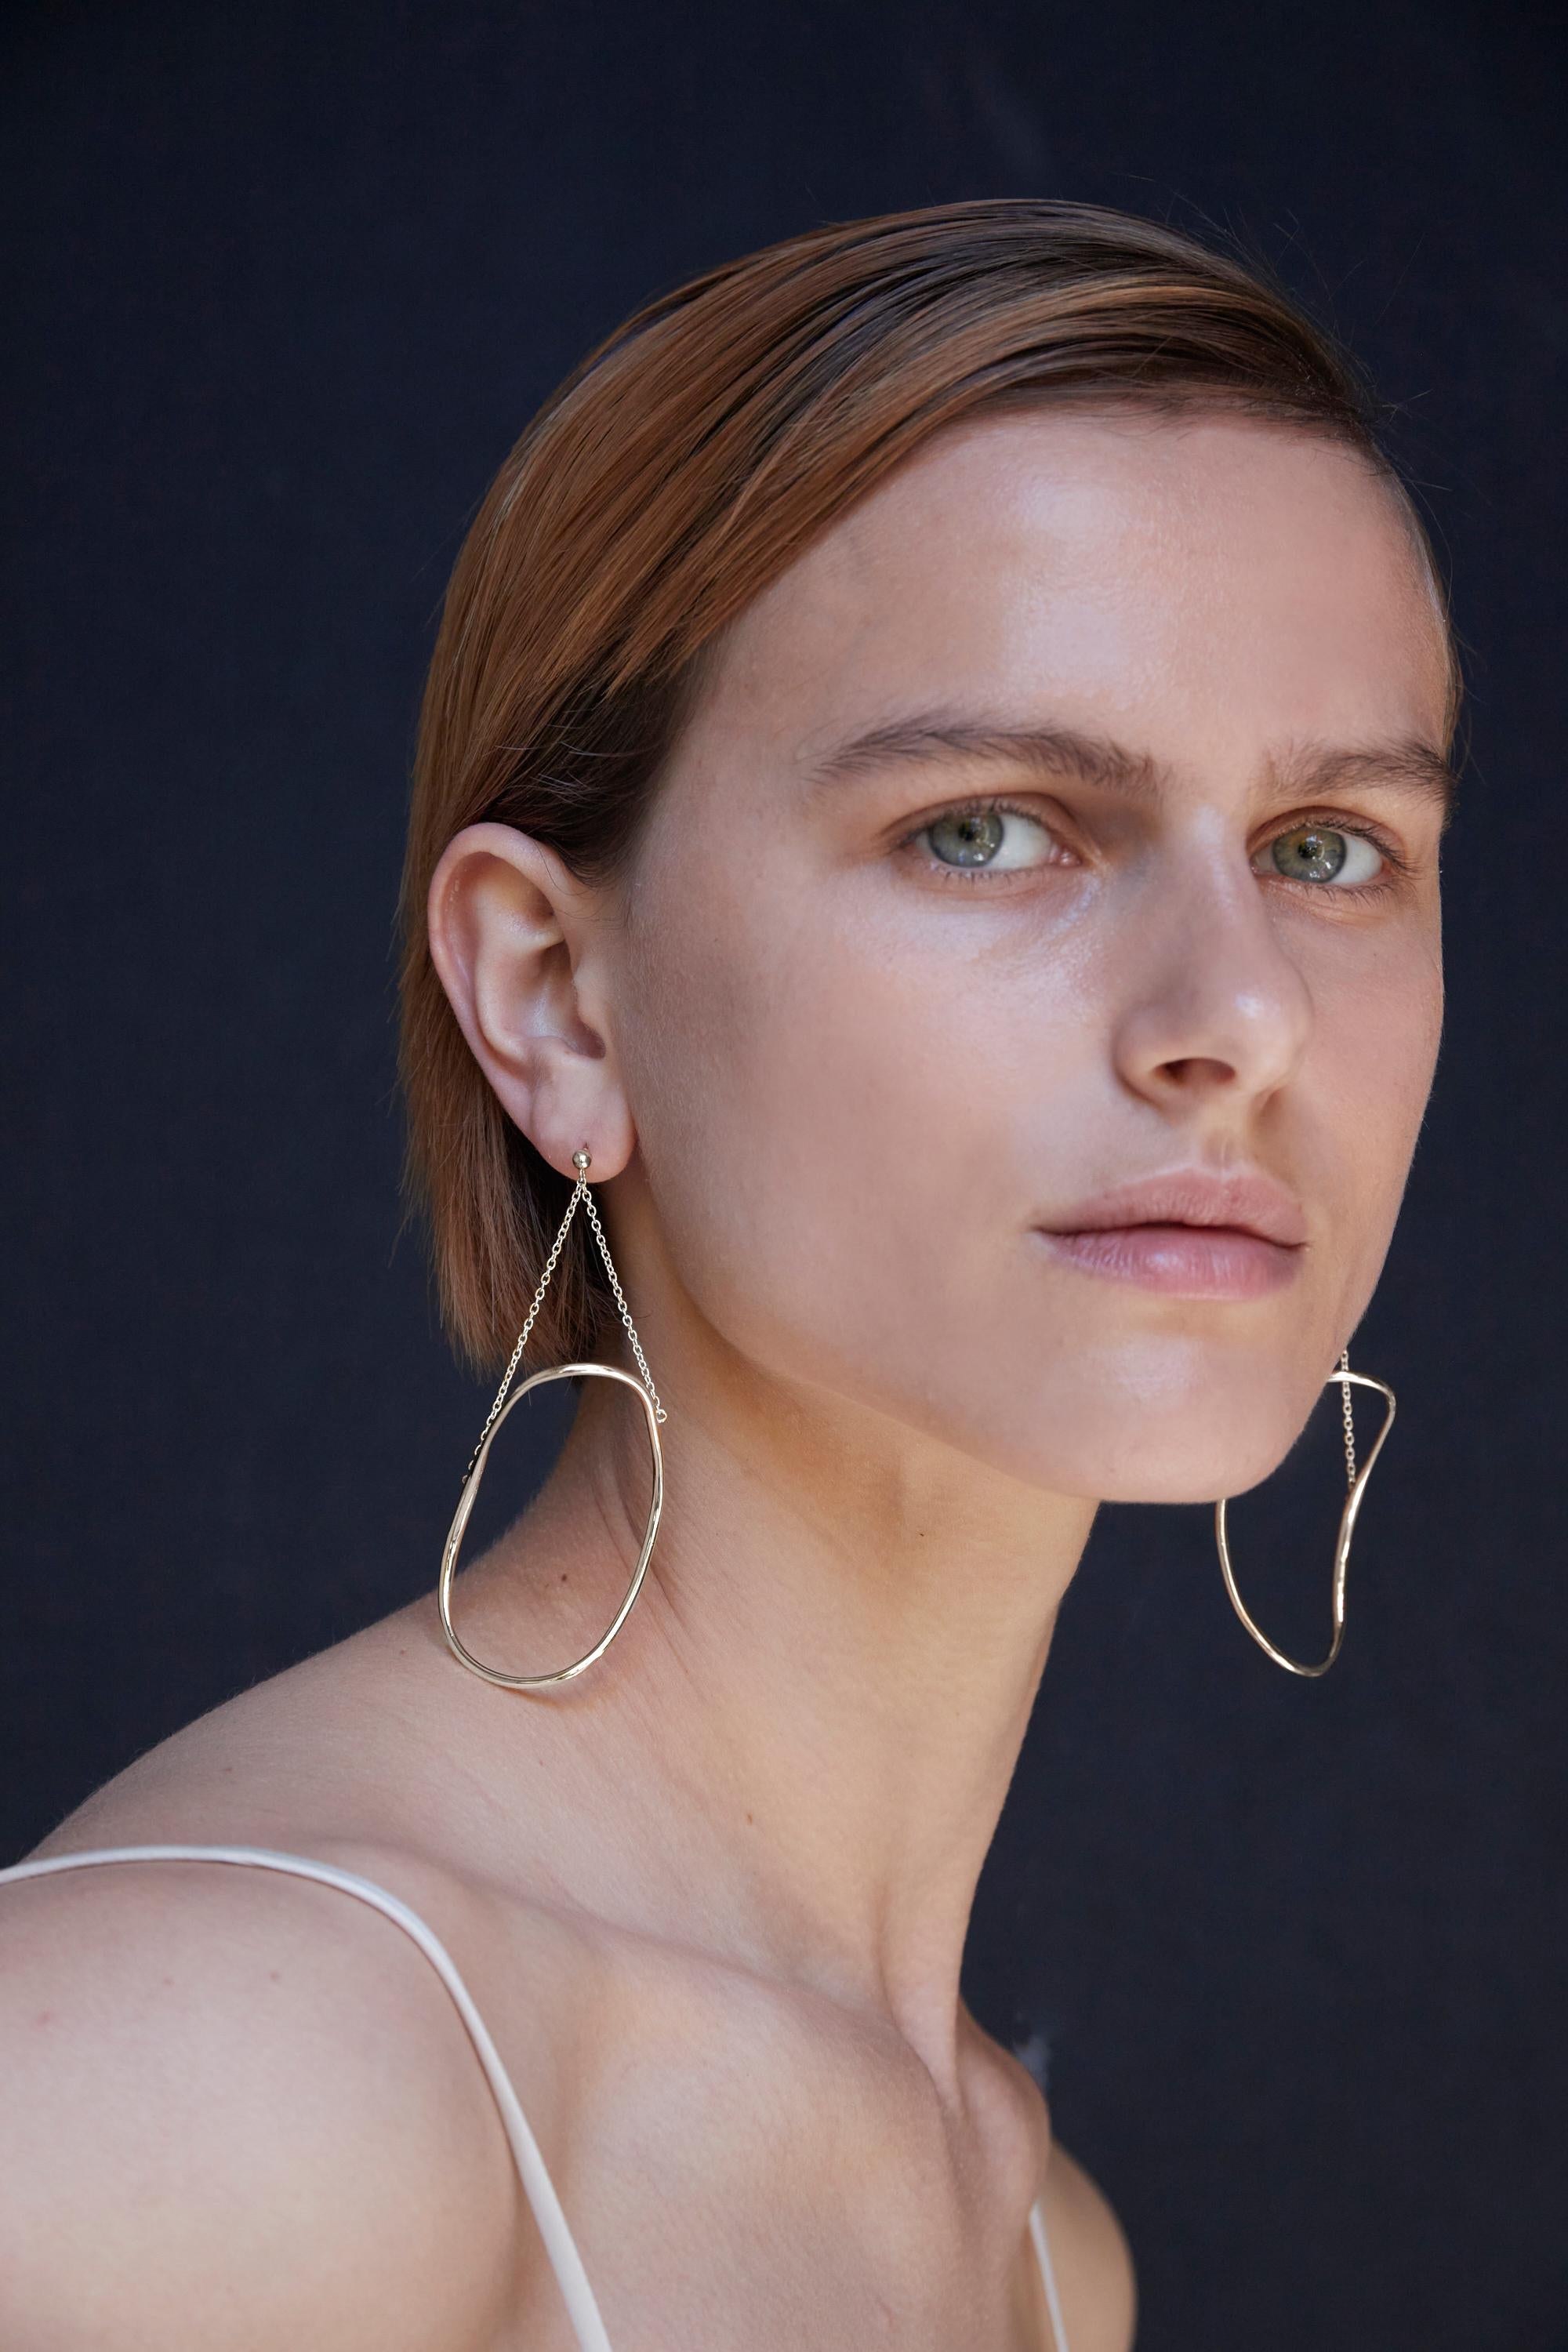 BAR Jewellery, London UK, GLIDE EARRINGS, Sterling Silver 

The Glide Earrings are abstract hoops that dance beneath the ear. Inspired by the work of Constantin Brancusi and Barbara Hepworth, whose considered, curved sculptures mimic forms in